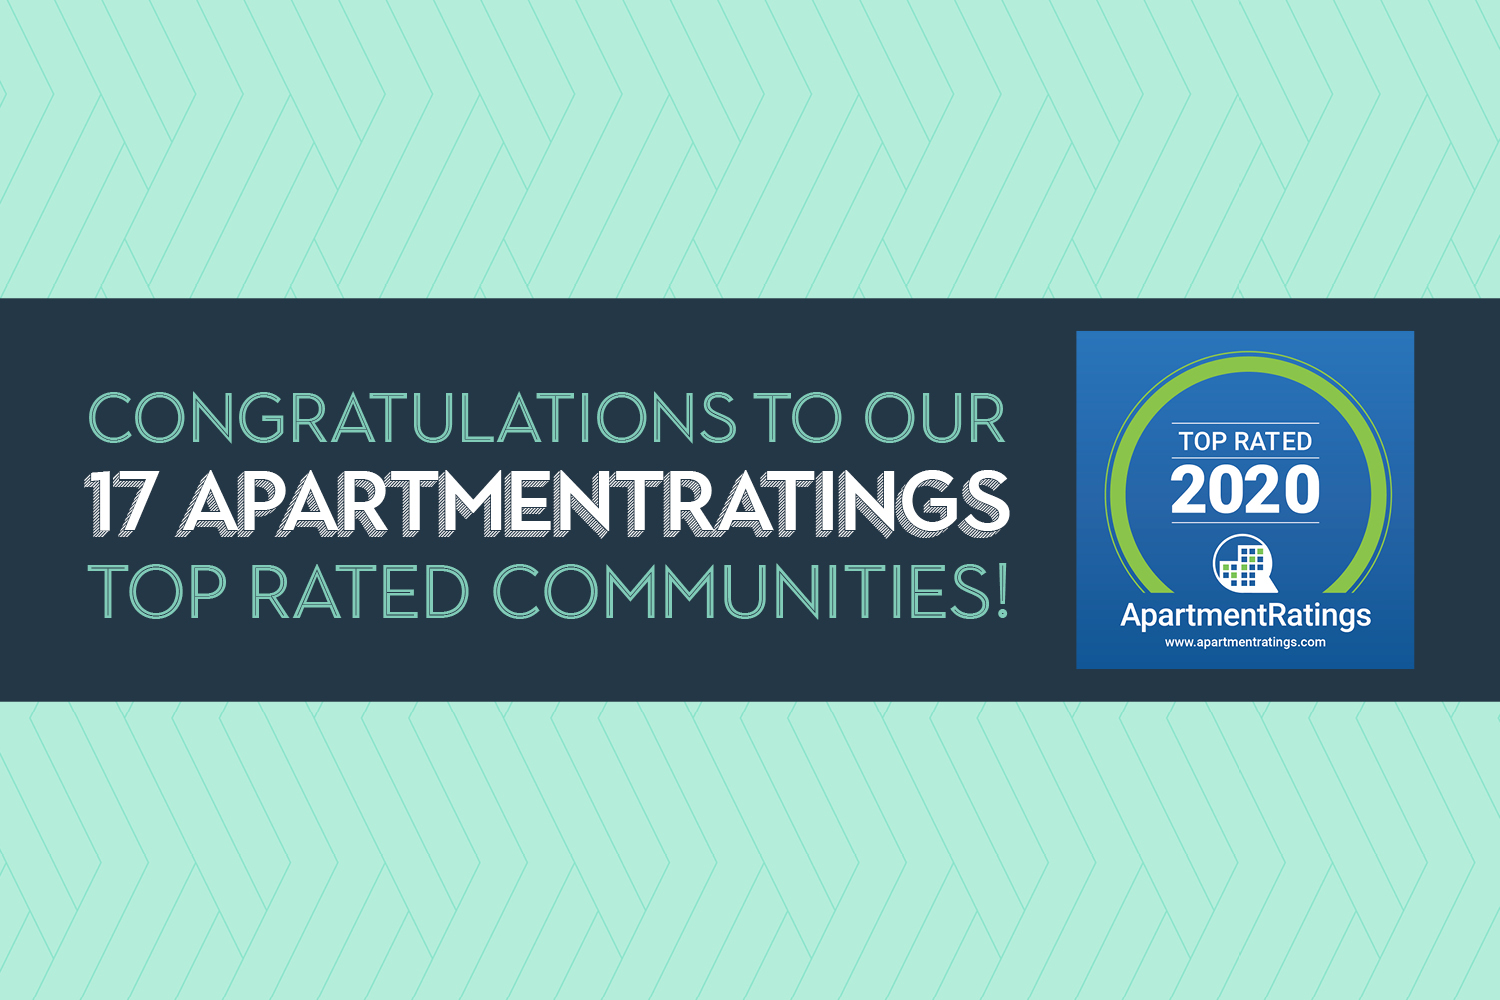 Exceptional customer service earns multifamily, student communities industry recognition